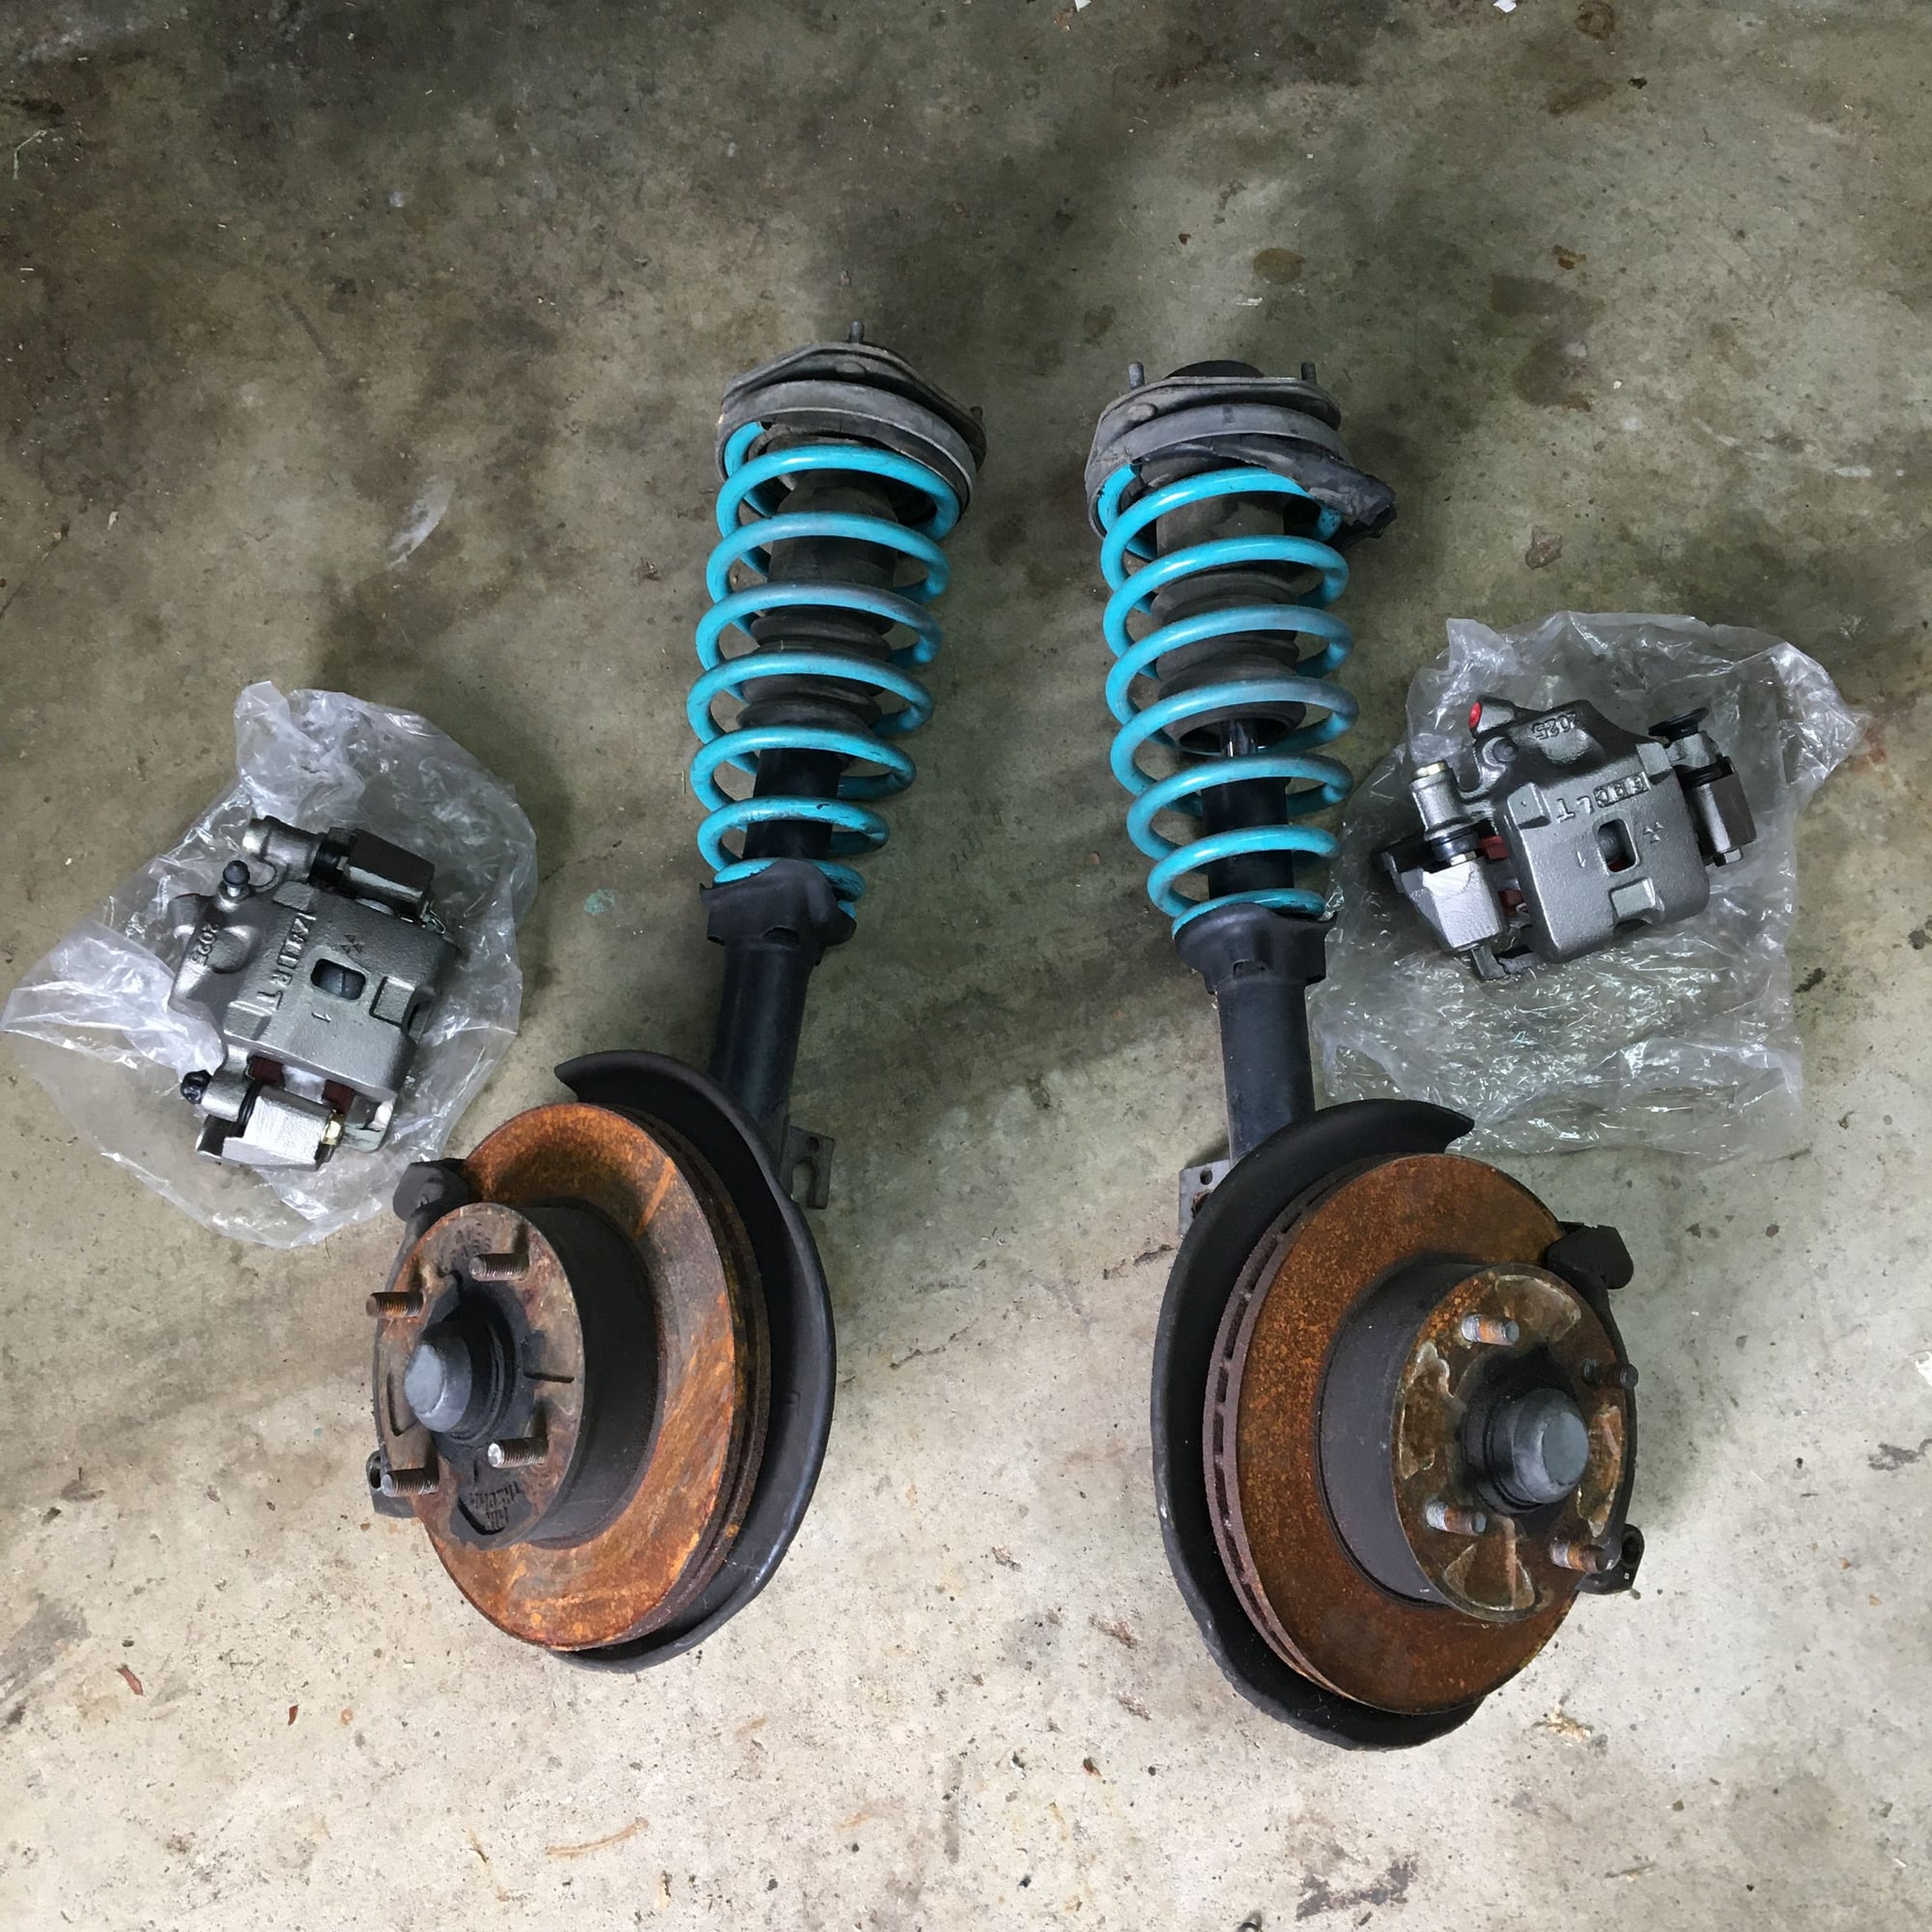 Steering/Suspension - GSL-SE FB 4x114.3 Front Spindles w/ Tokico Illumina Shocks/Springs - Used - 1984 to 1985 Mazda RX-7 - Chattanooga, TN 37412, United States